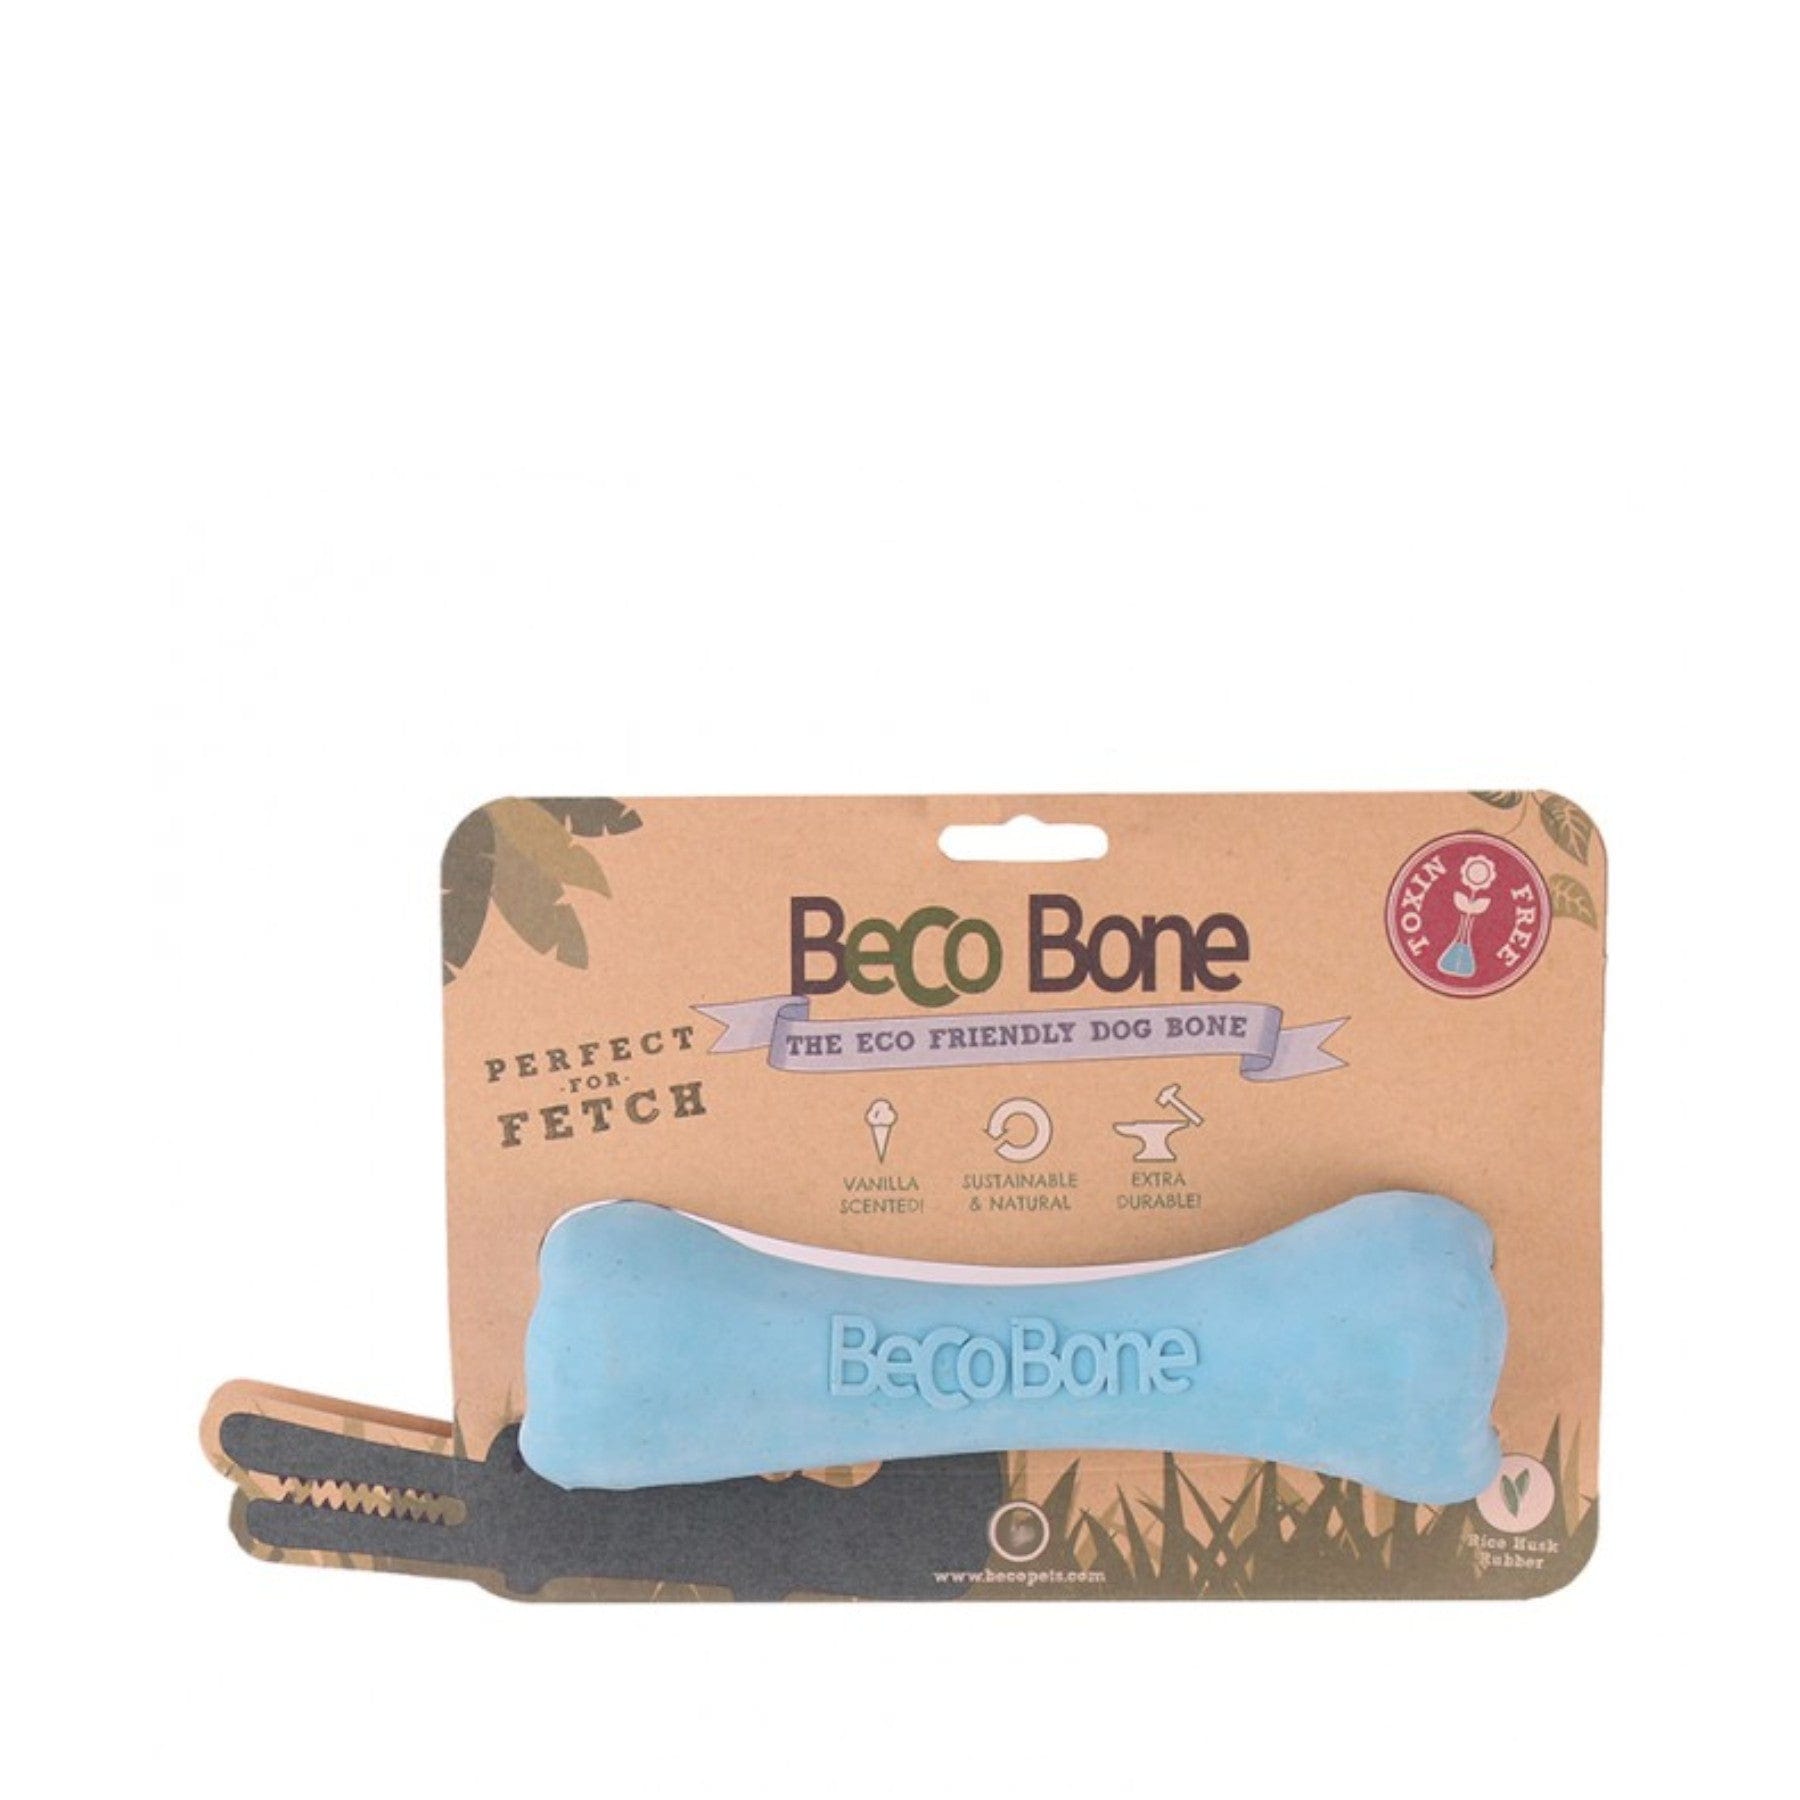 Eco-friendly Beco Bone dog toy packaging with vanilla scented sustainable and extra durable features